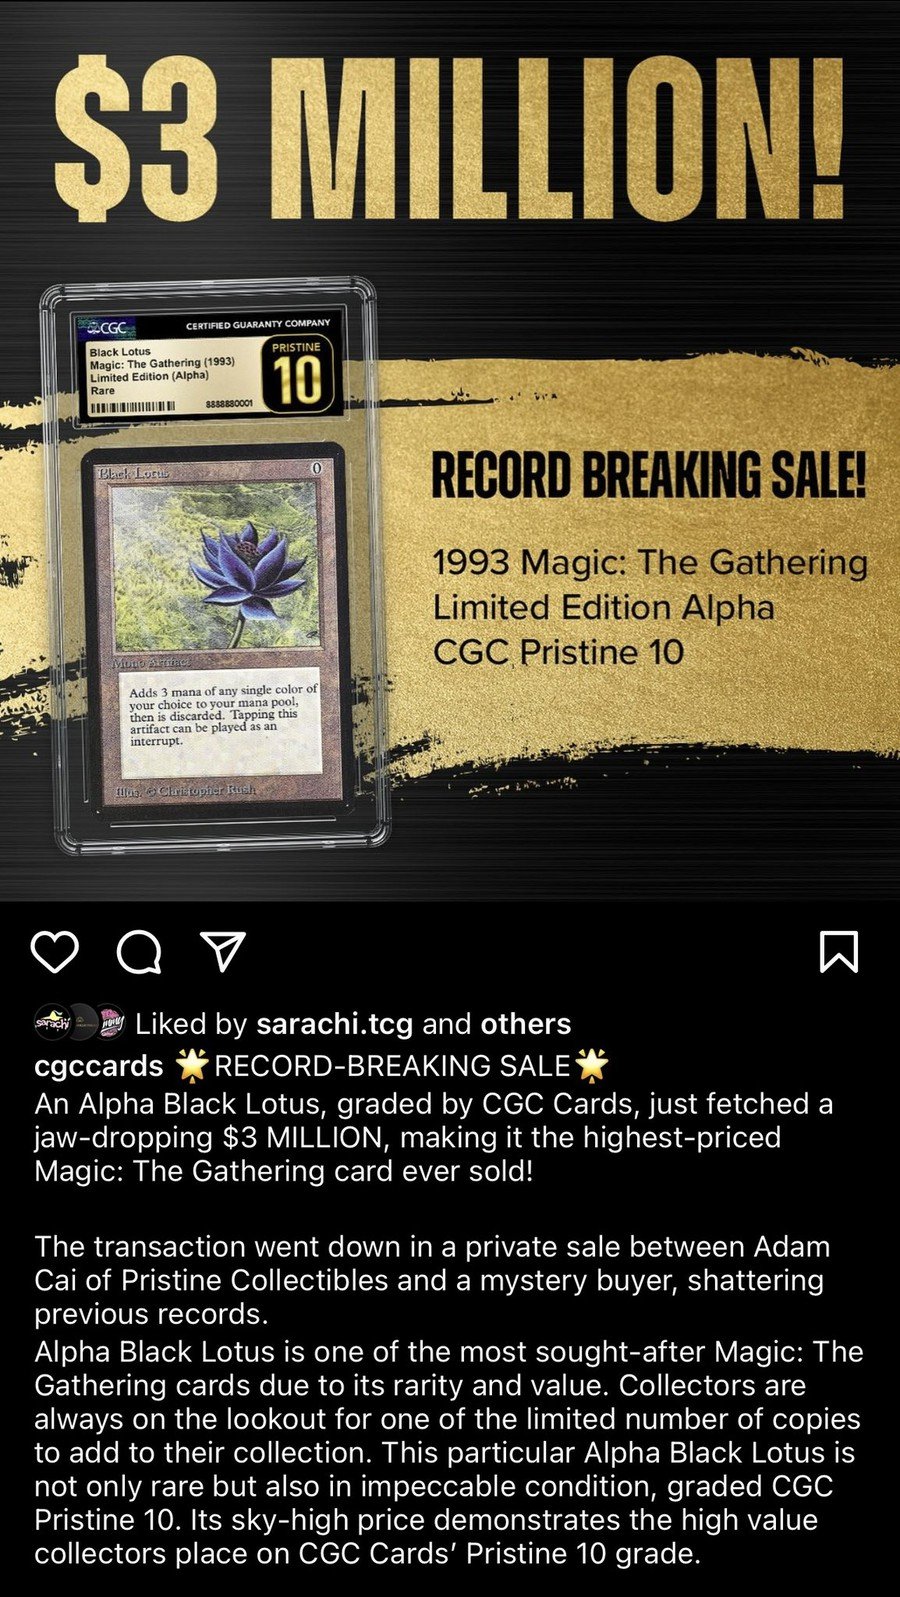 Black Lotus is sold for $3 million and becomes MTG's most expensive card